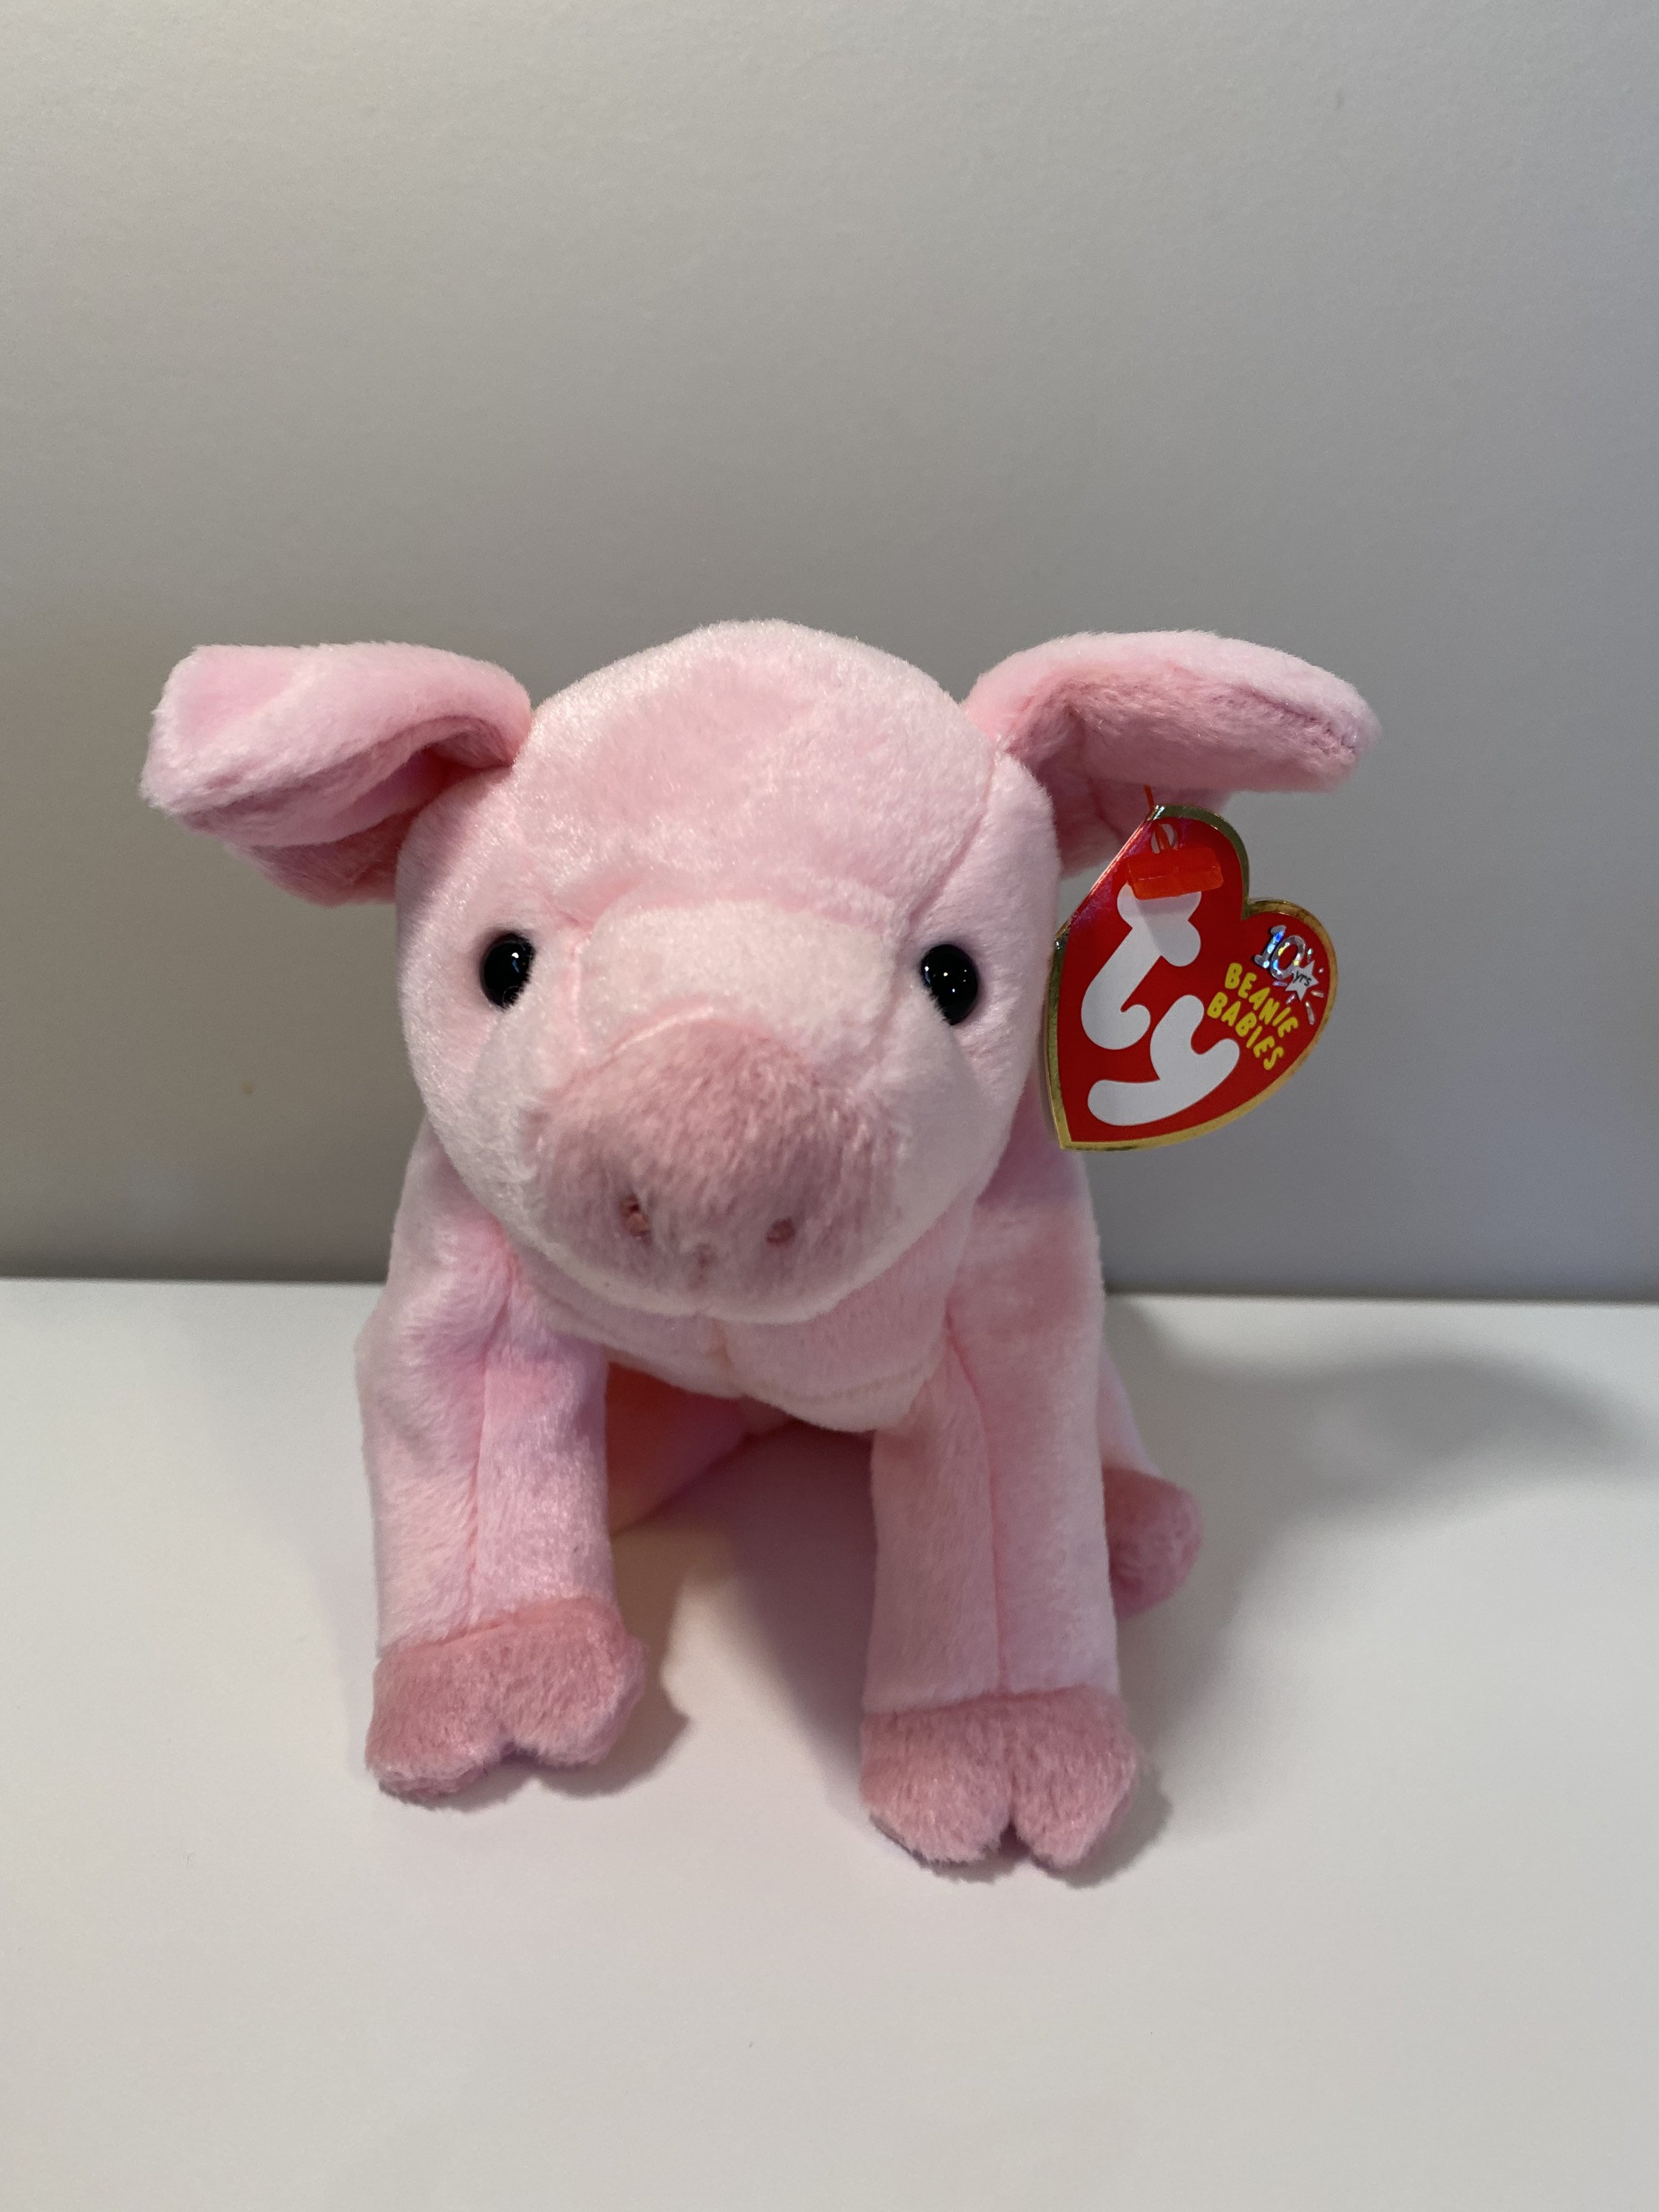 MINT with MINT TAGS TY HAMLET the PIG BEANIE BABY 